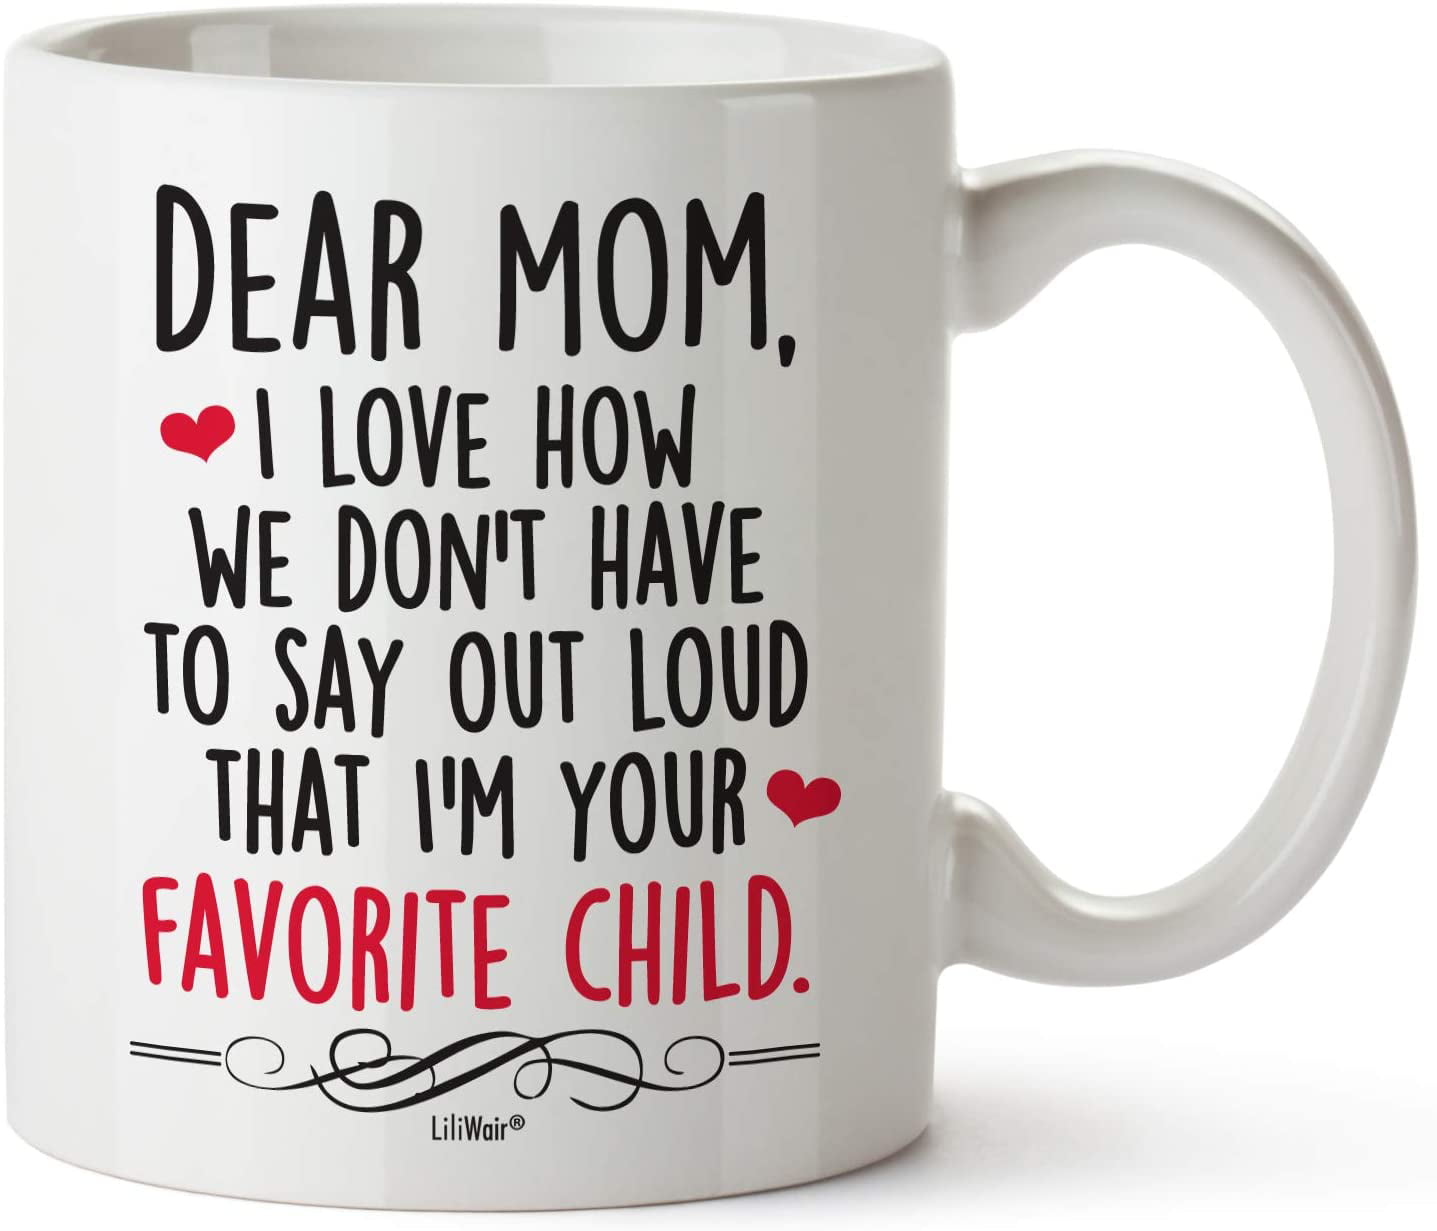 Funny Travel Mug For Your Grandson Birthday Present Being My Grandson Is Really The Only Gift You Need Christmas Gift